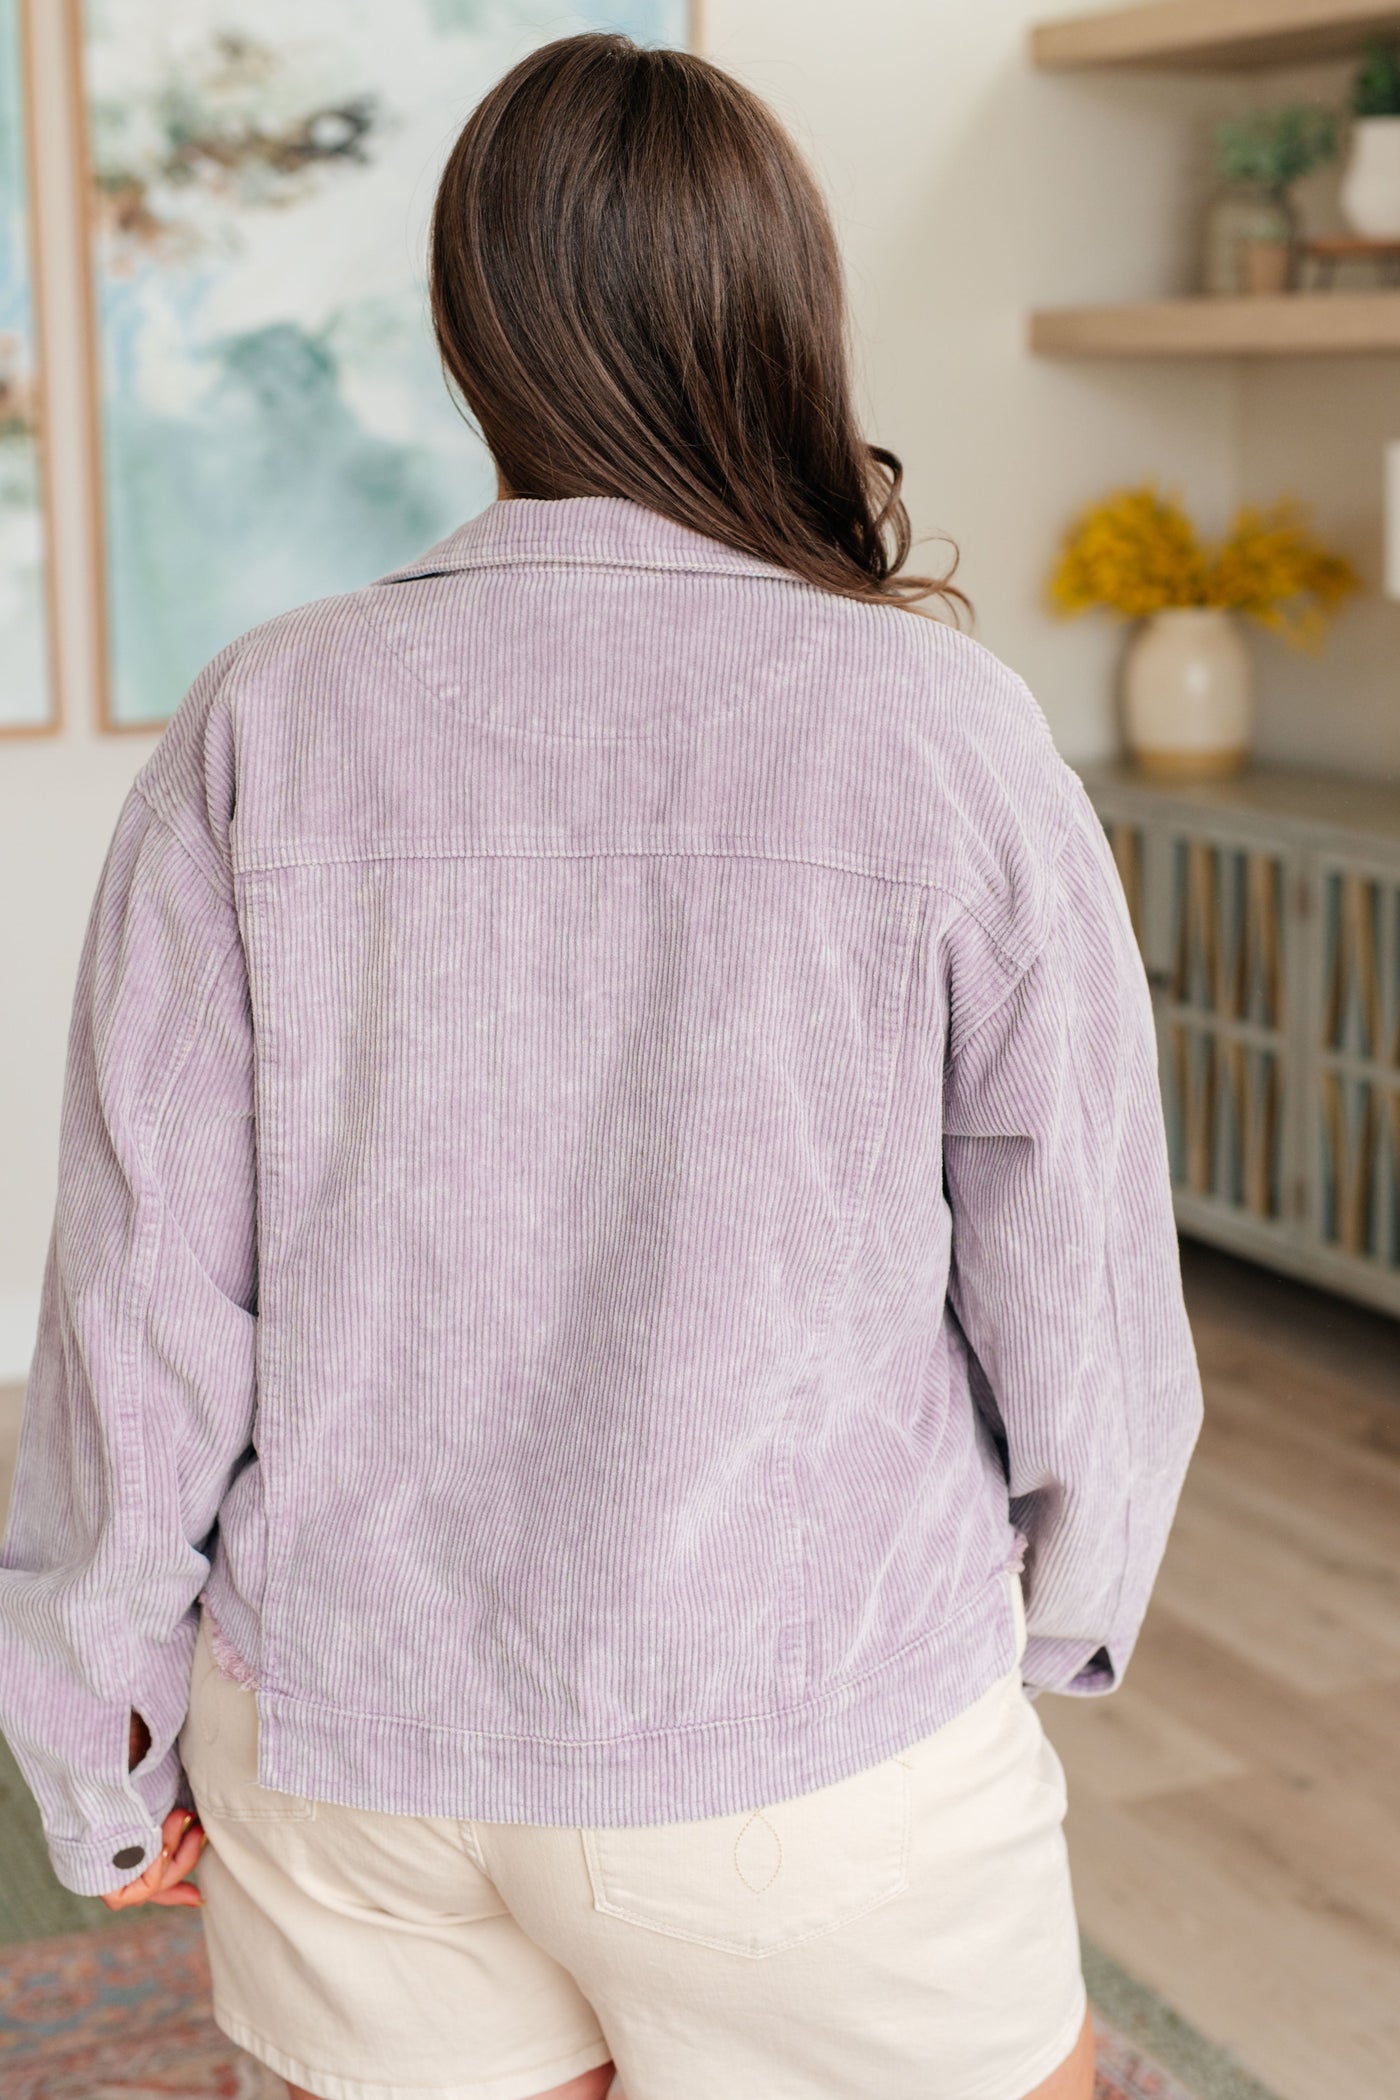 Main Stage Corduroy Jacket in Lavender-Layers-Ave Shops-Market Street Nest, Fashionable Clothing, Shoes and Home Décor Located in Mabank, TX